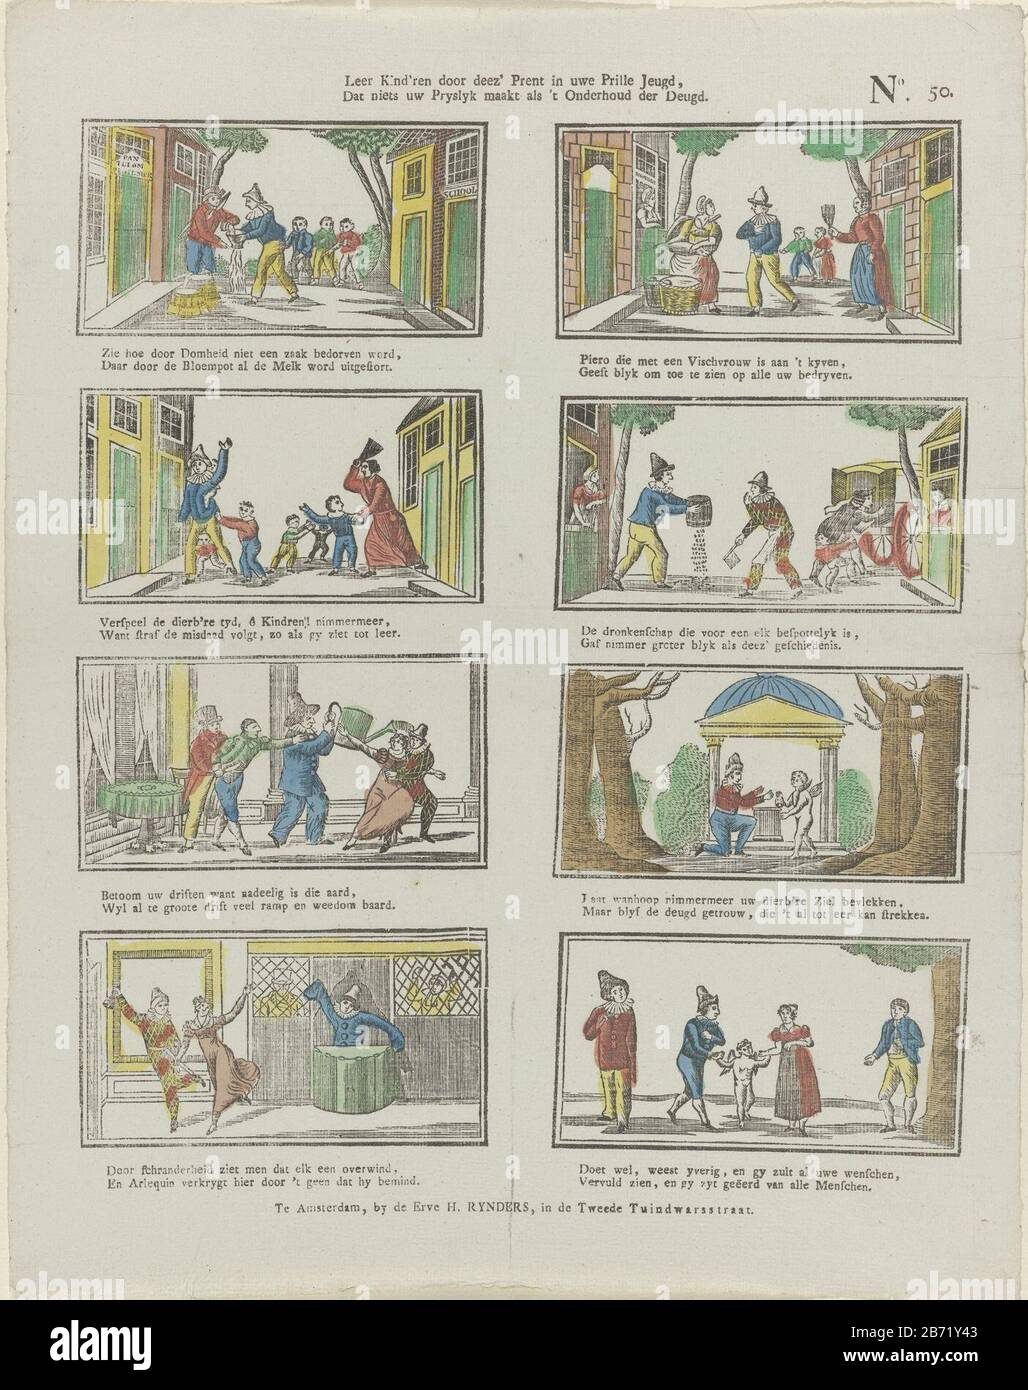 Leer kind'ren door deez' prent in uwe prille jeugd, Dat niets uw pryslyk maakt als 't onderhoud der deugd (titel op object) Leaf with eight scenes with characters from the Commedia dell'arte. Under each image a two-line verse. Numbered upper right: No. 50. Manufacturer : Seller: Preserve H. Rynders (listed building) Publisher: Jacobus Wendel Print Author: anonymous place Manufacture: Seller: Amsterdam Publisher: Amsterdam Print Author: Netherlands Date: 1795 - 1819 Physical features: woodcut colored in blue, yellow, green and red; text printing material: paper Technique: woodcut / colors / pri Stock Photo